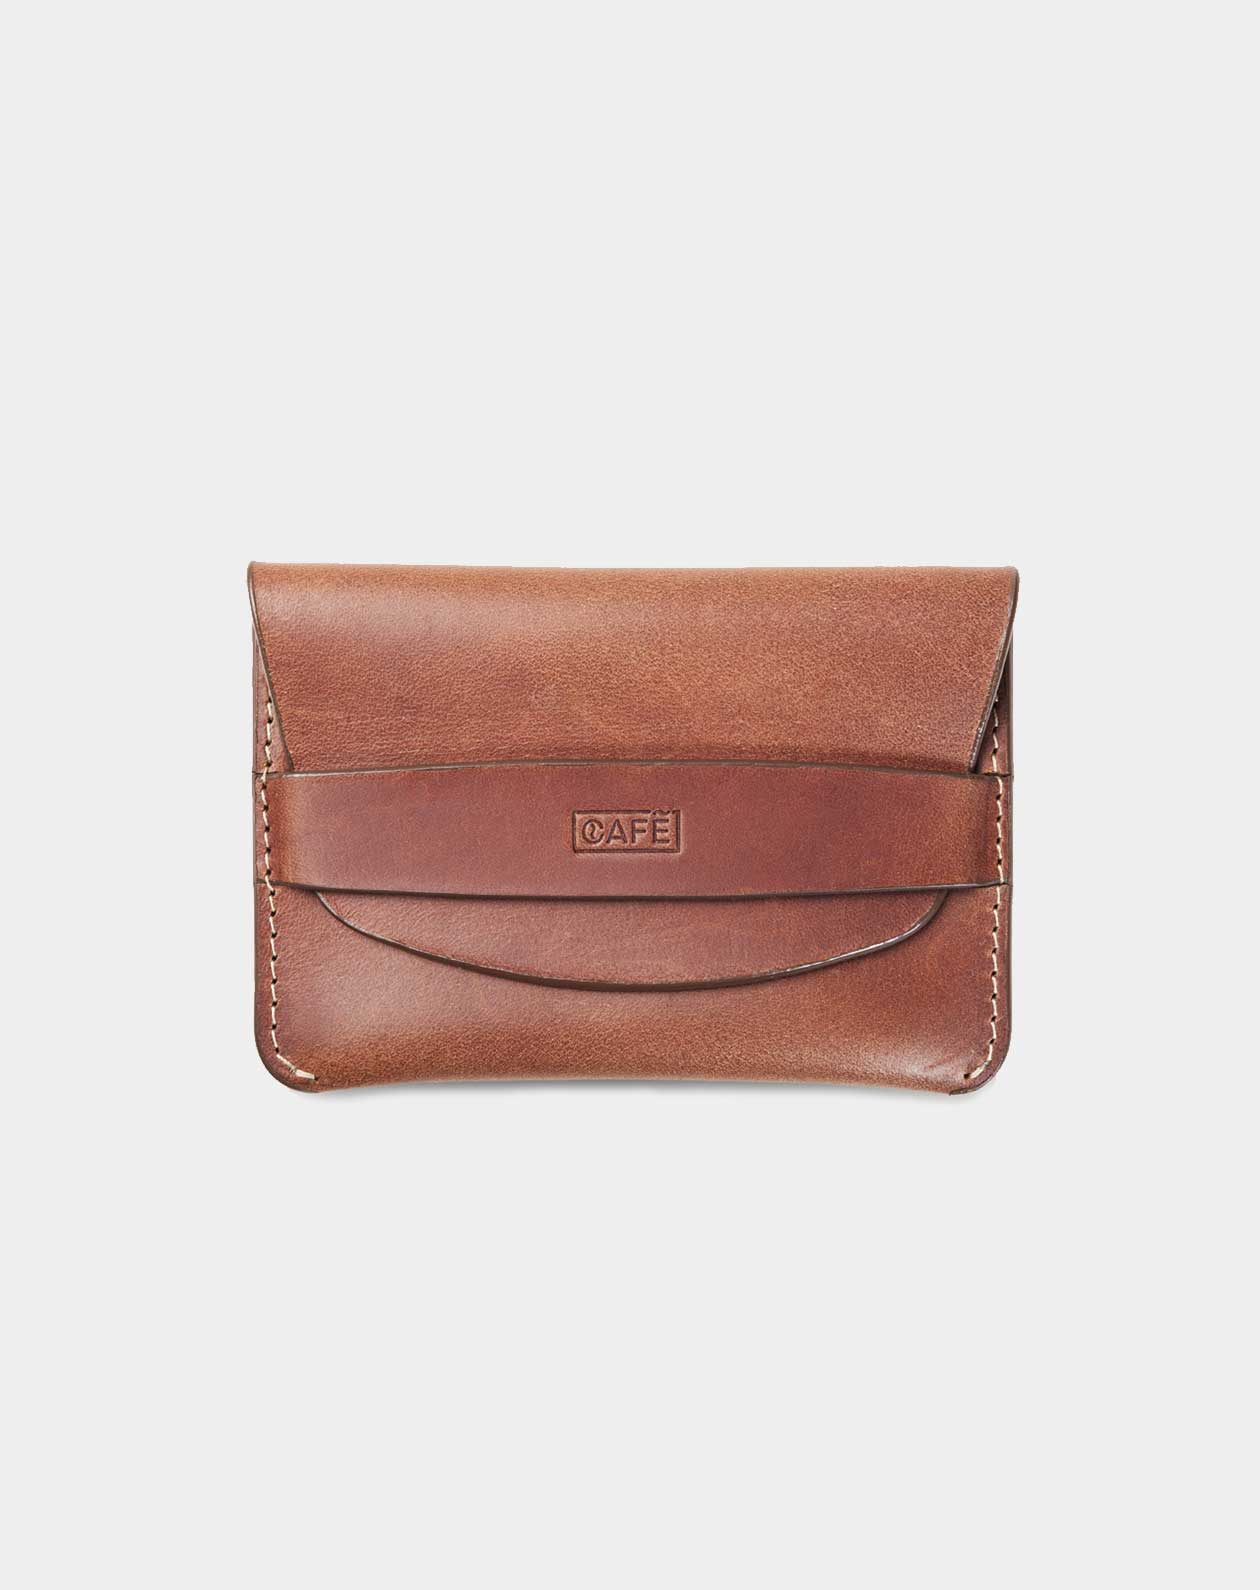 flap wallet brown for coins, cards and bills